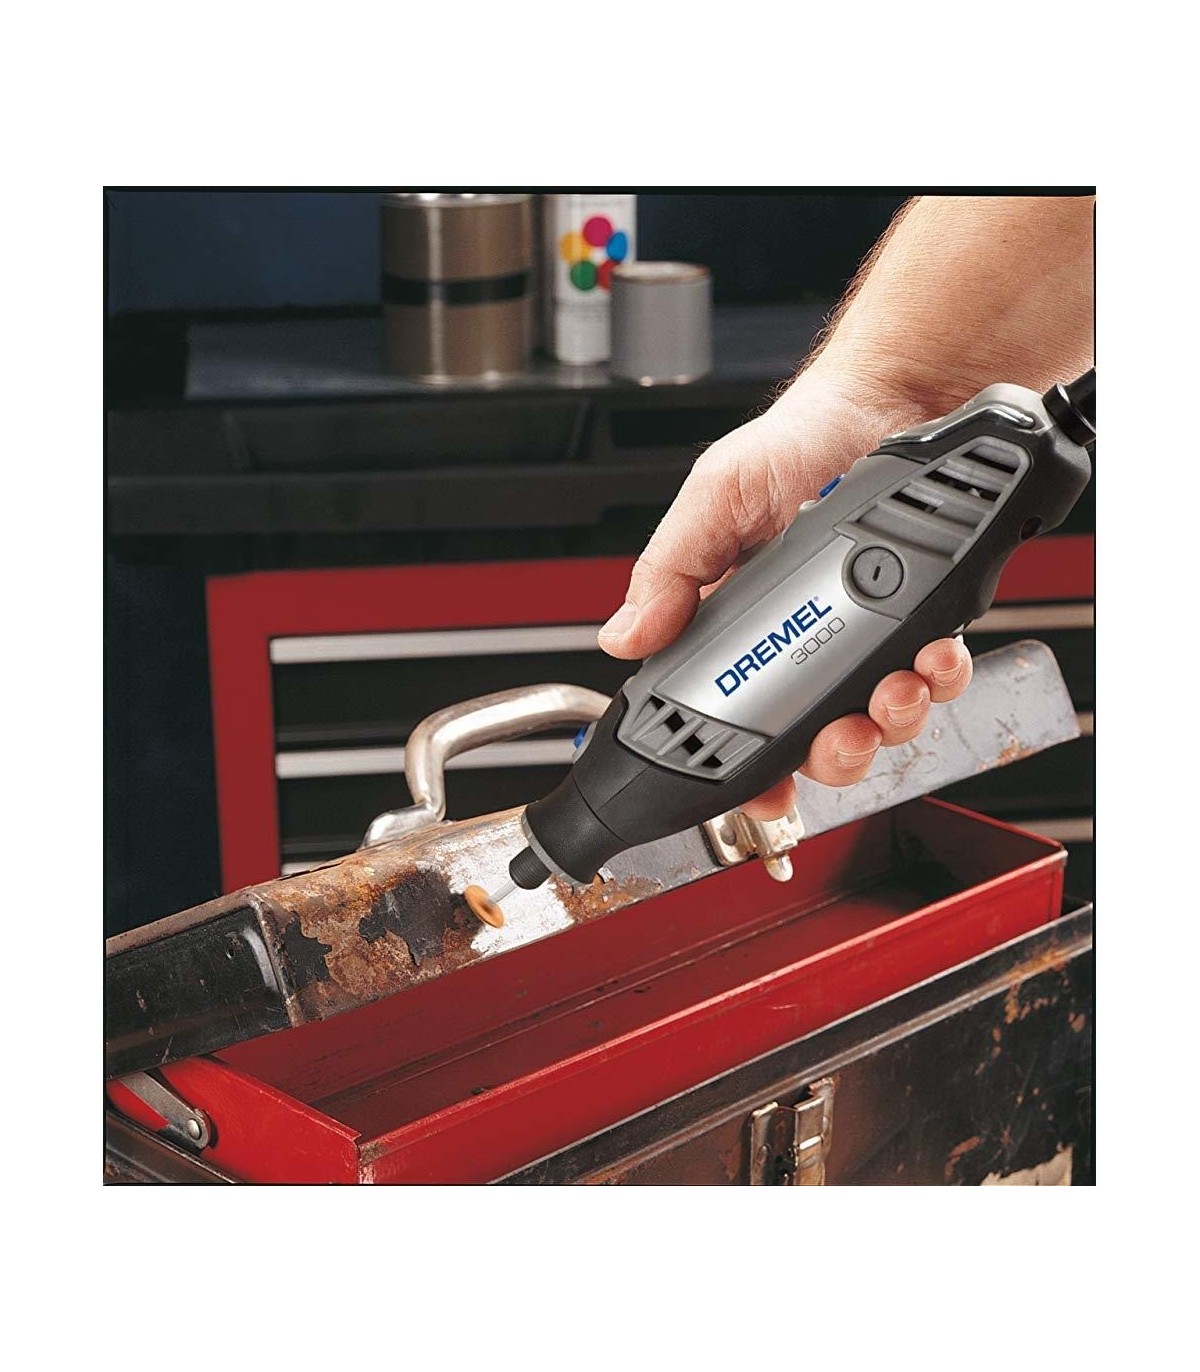 Dremel Ultra-Saw Tool Kit - Midwest Technology Products